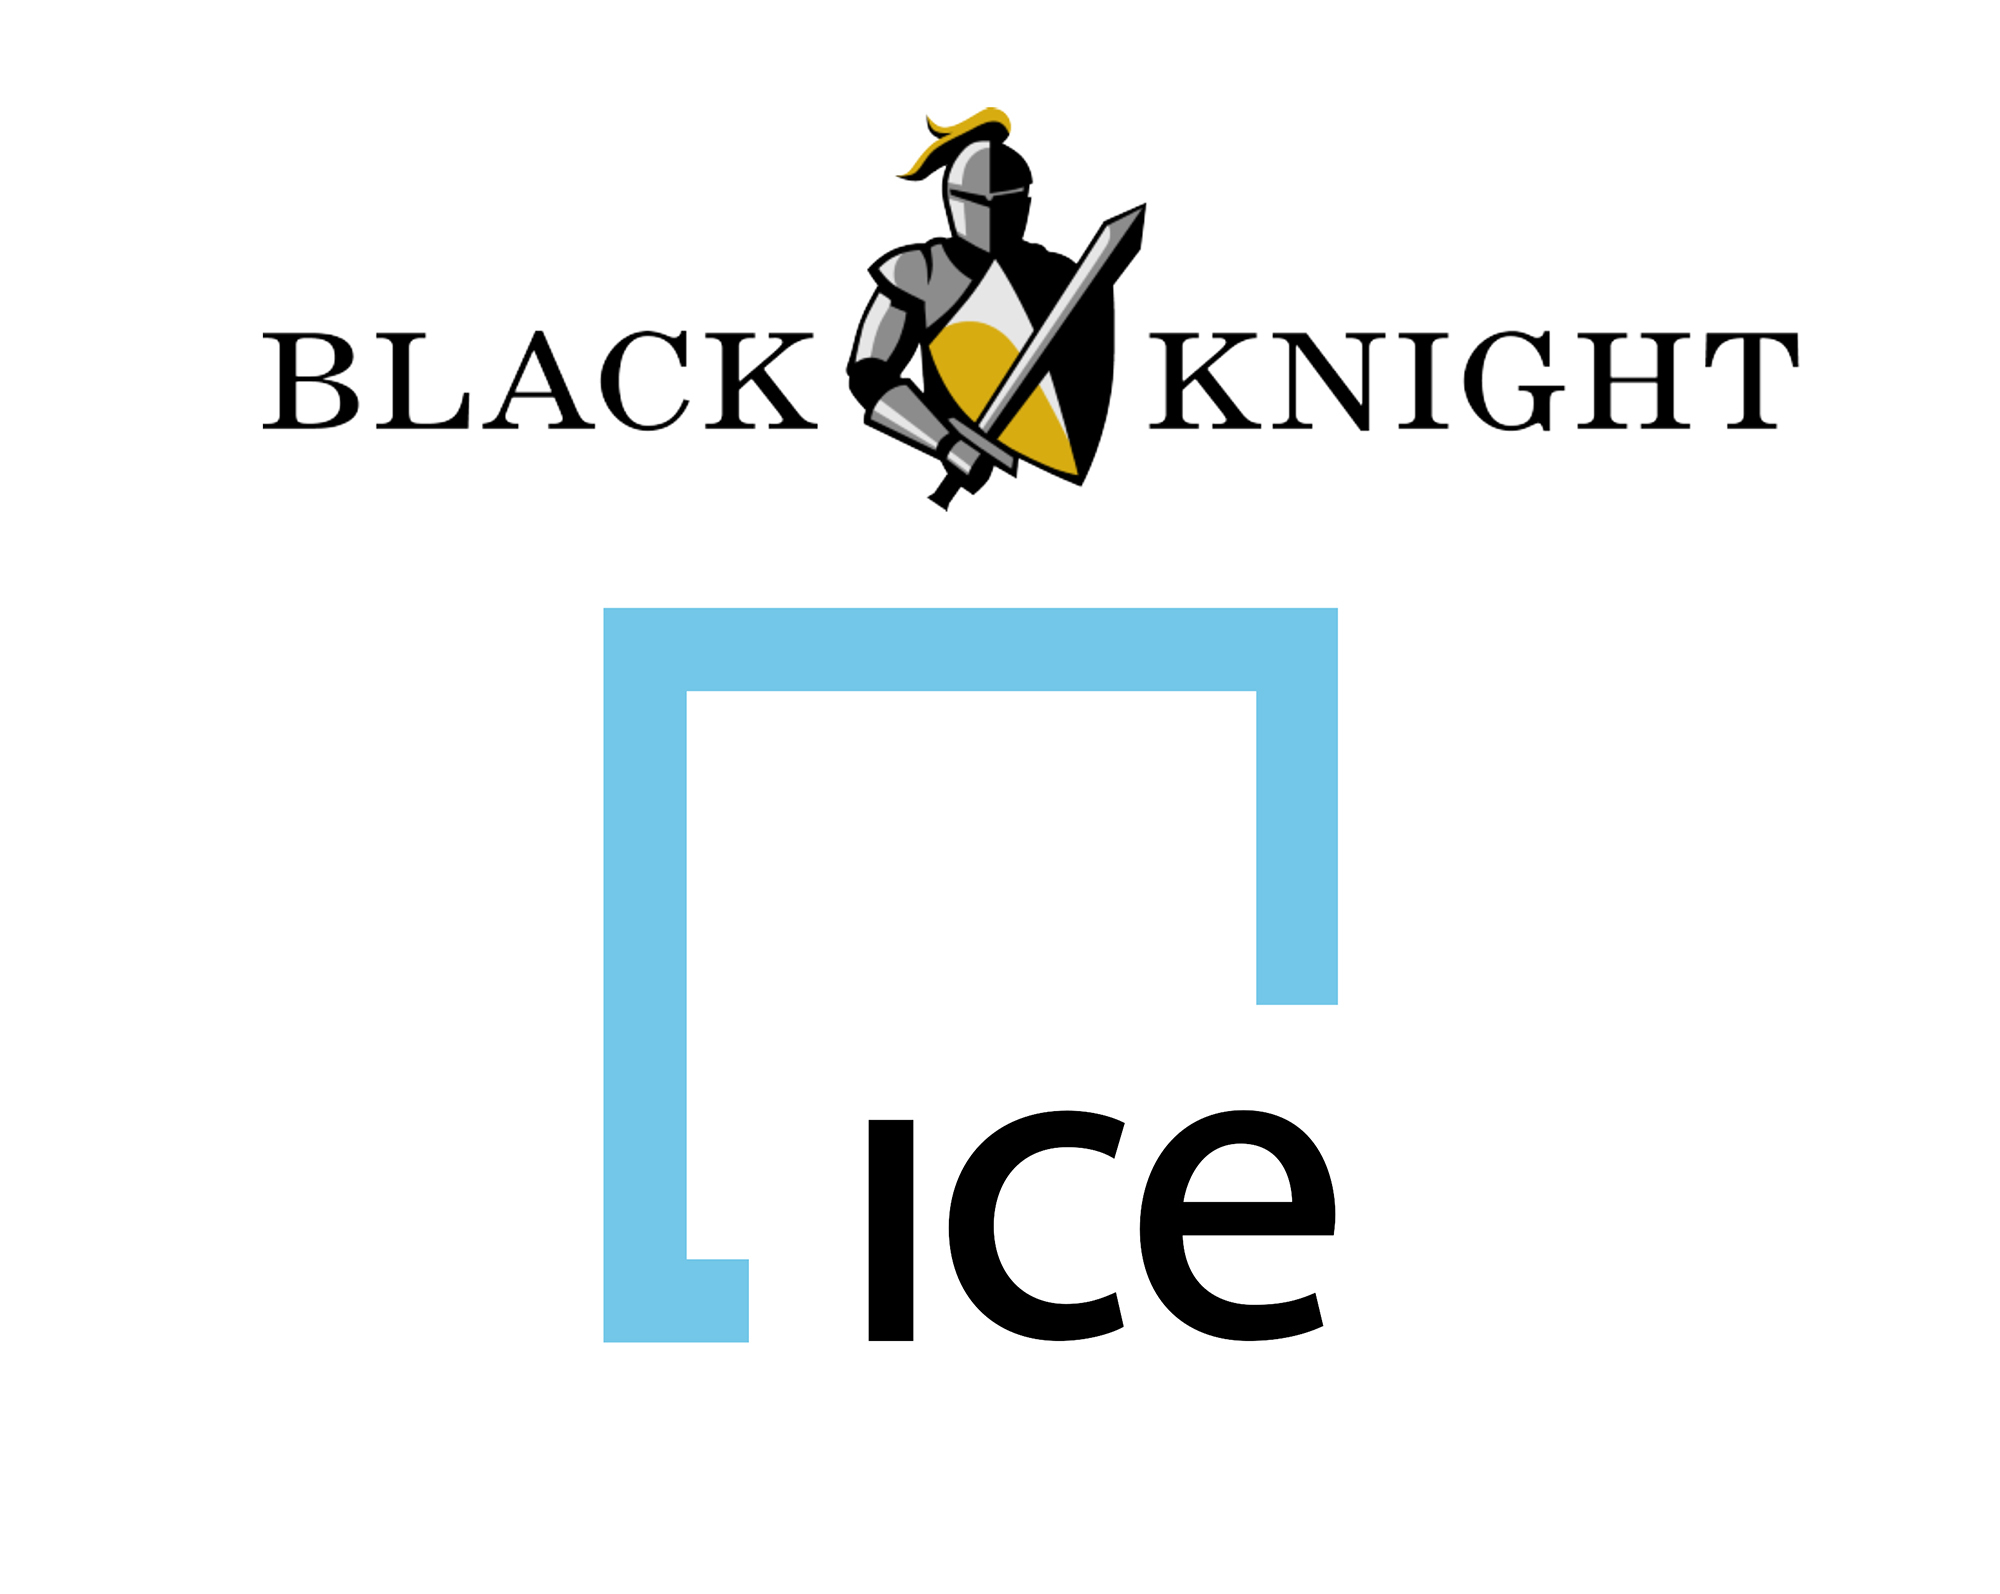 Intercontinental Exchange Inc. agreed to buy Black Knight Inc. for $13.1 billion.